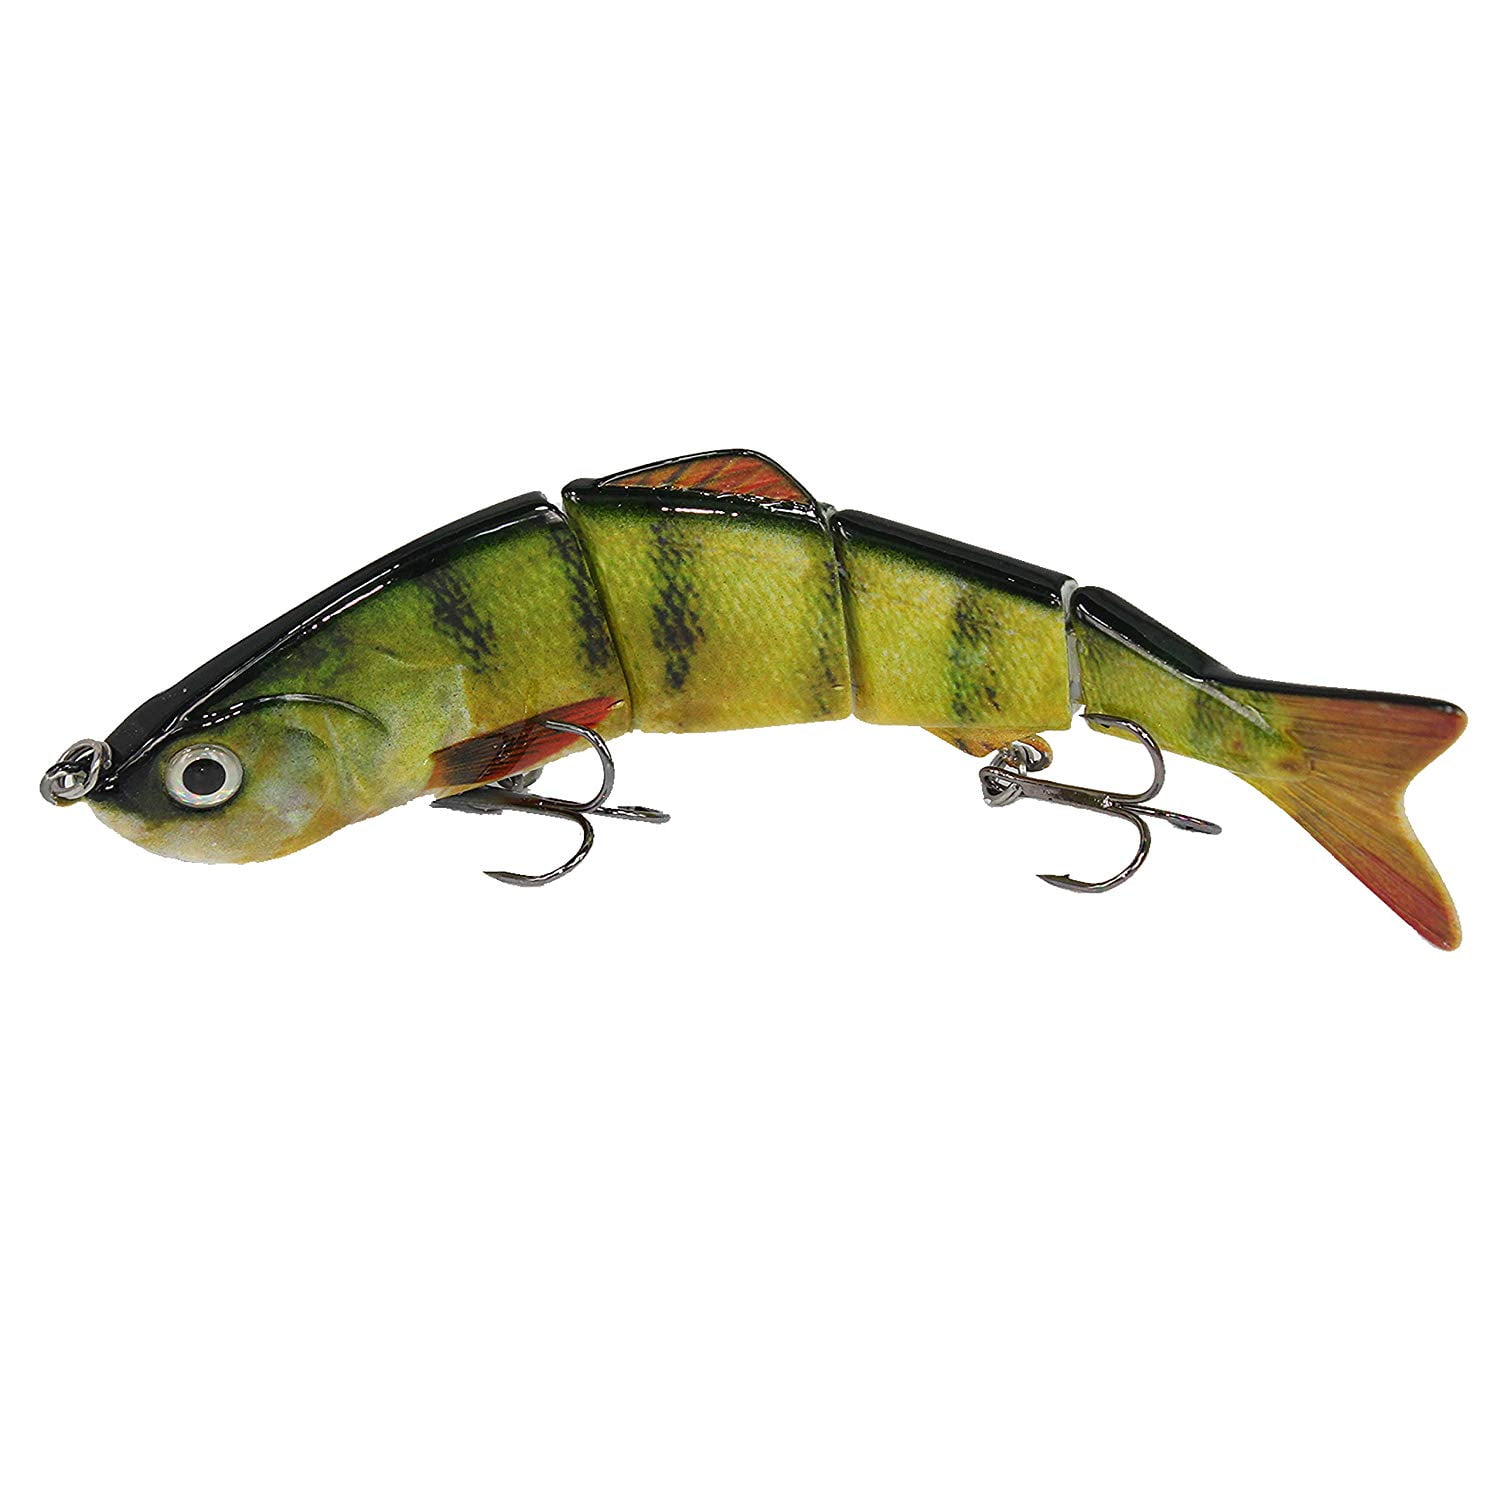 Thomify Hard Multi-Jointed Fishing Lure Swimbait Topwater Crankbait for Bass  Trout Musky Pike 